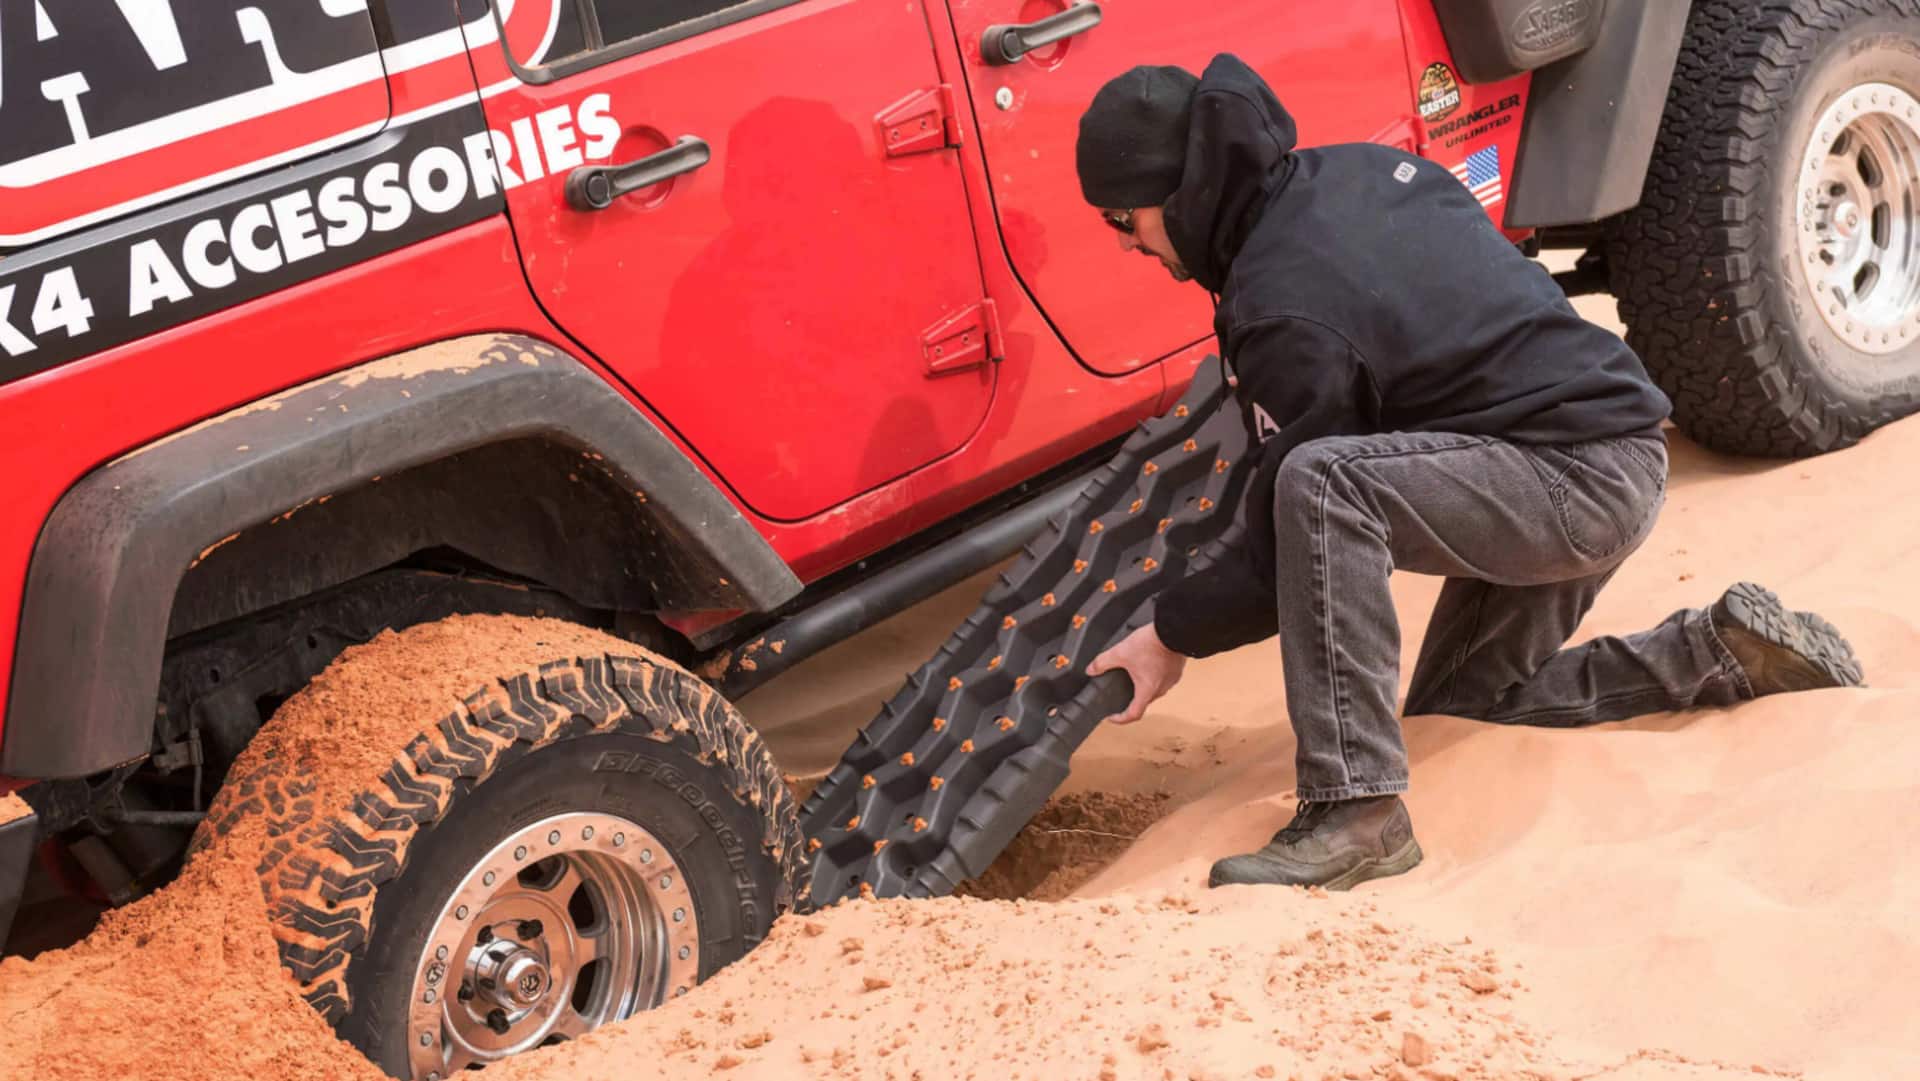 5 accessories you must have for off-roading in India